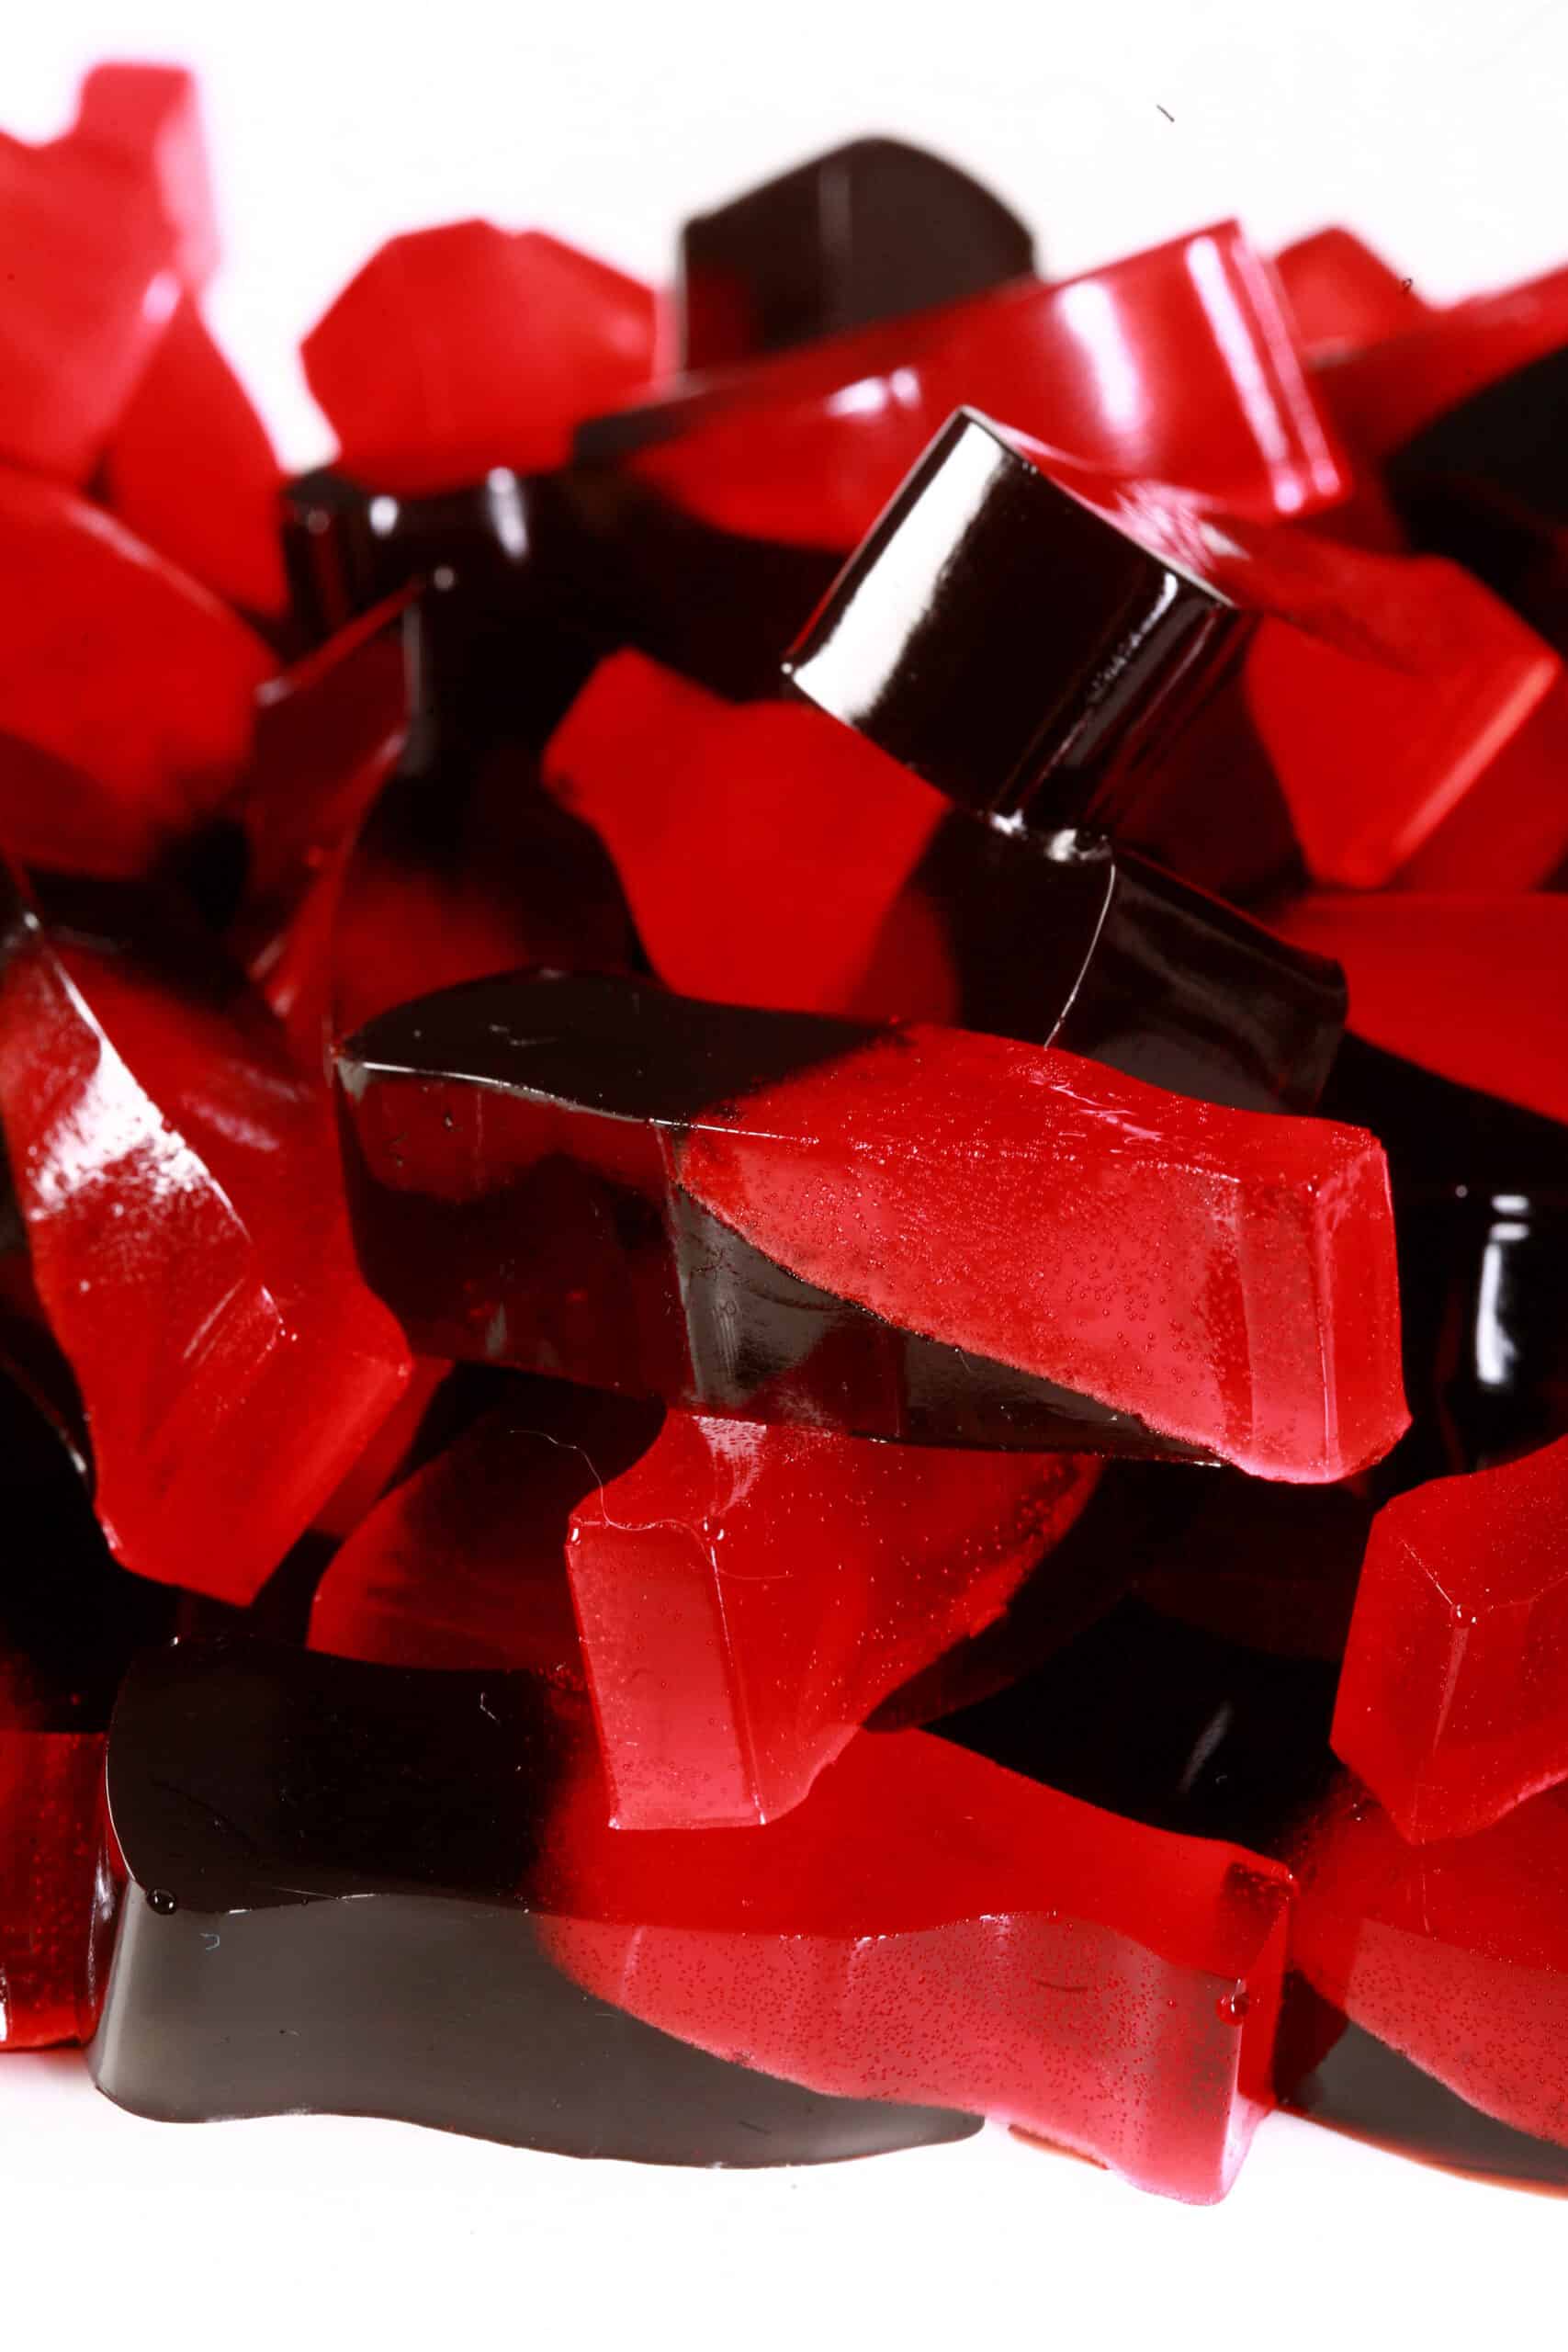 A pile of 2 colored red and brown coke bottle shaped keto sour cherry cola gummies.